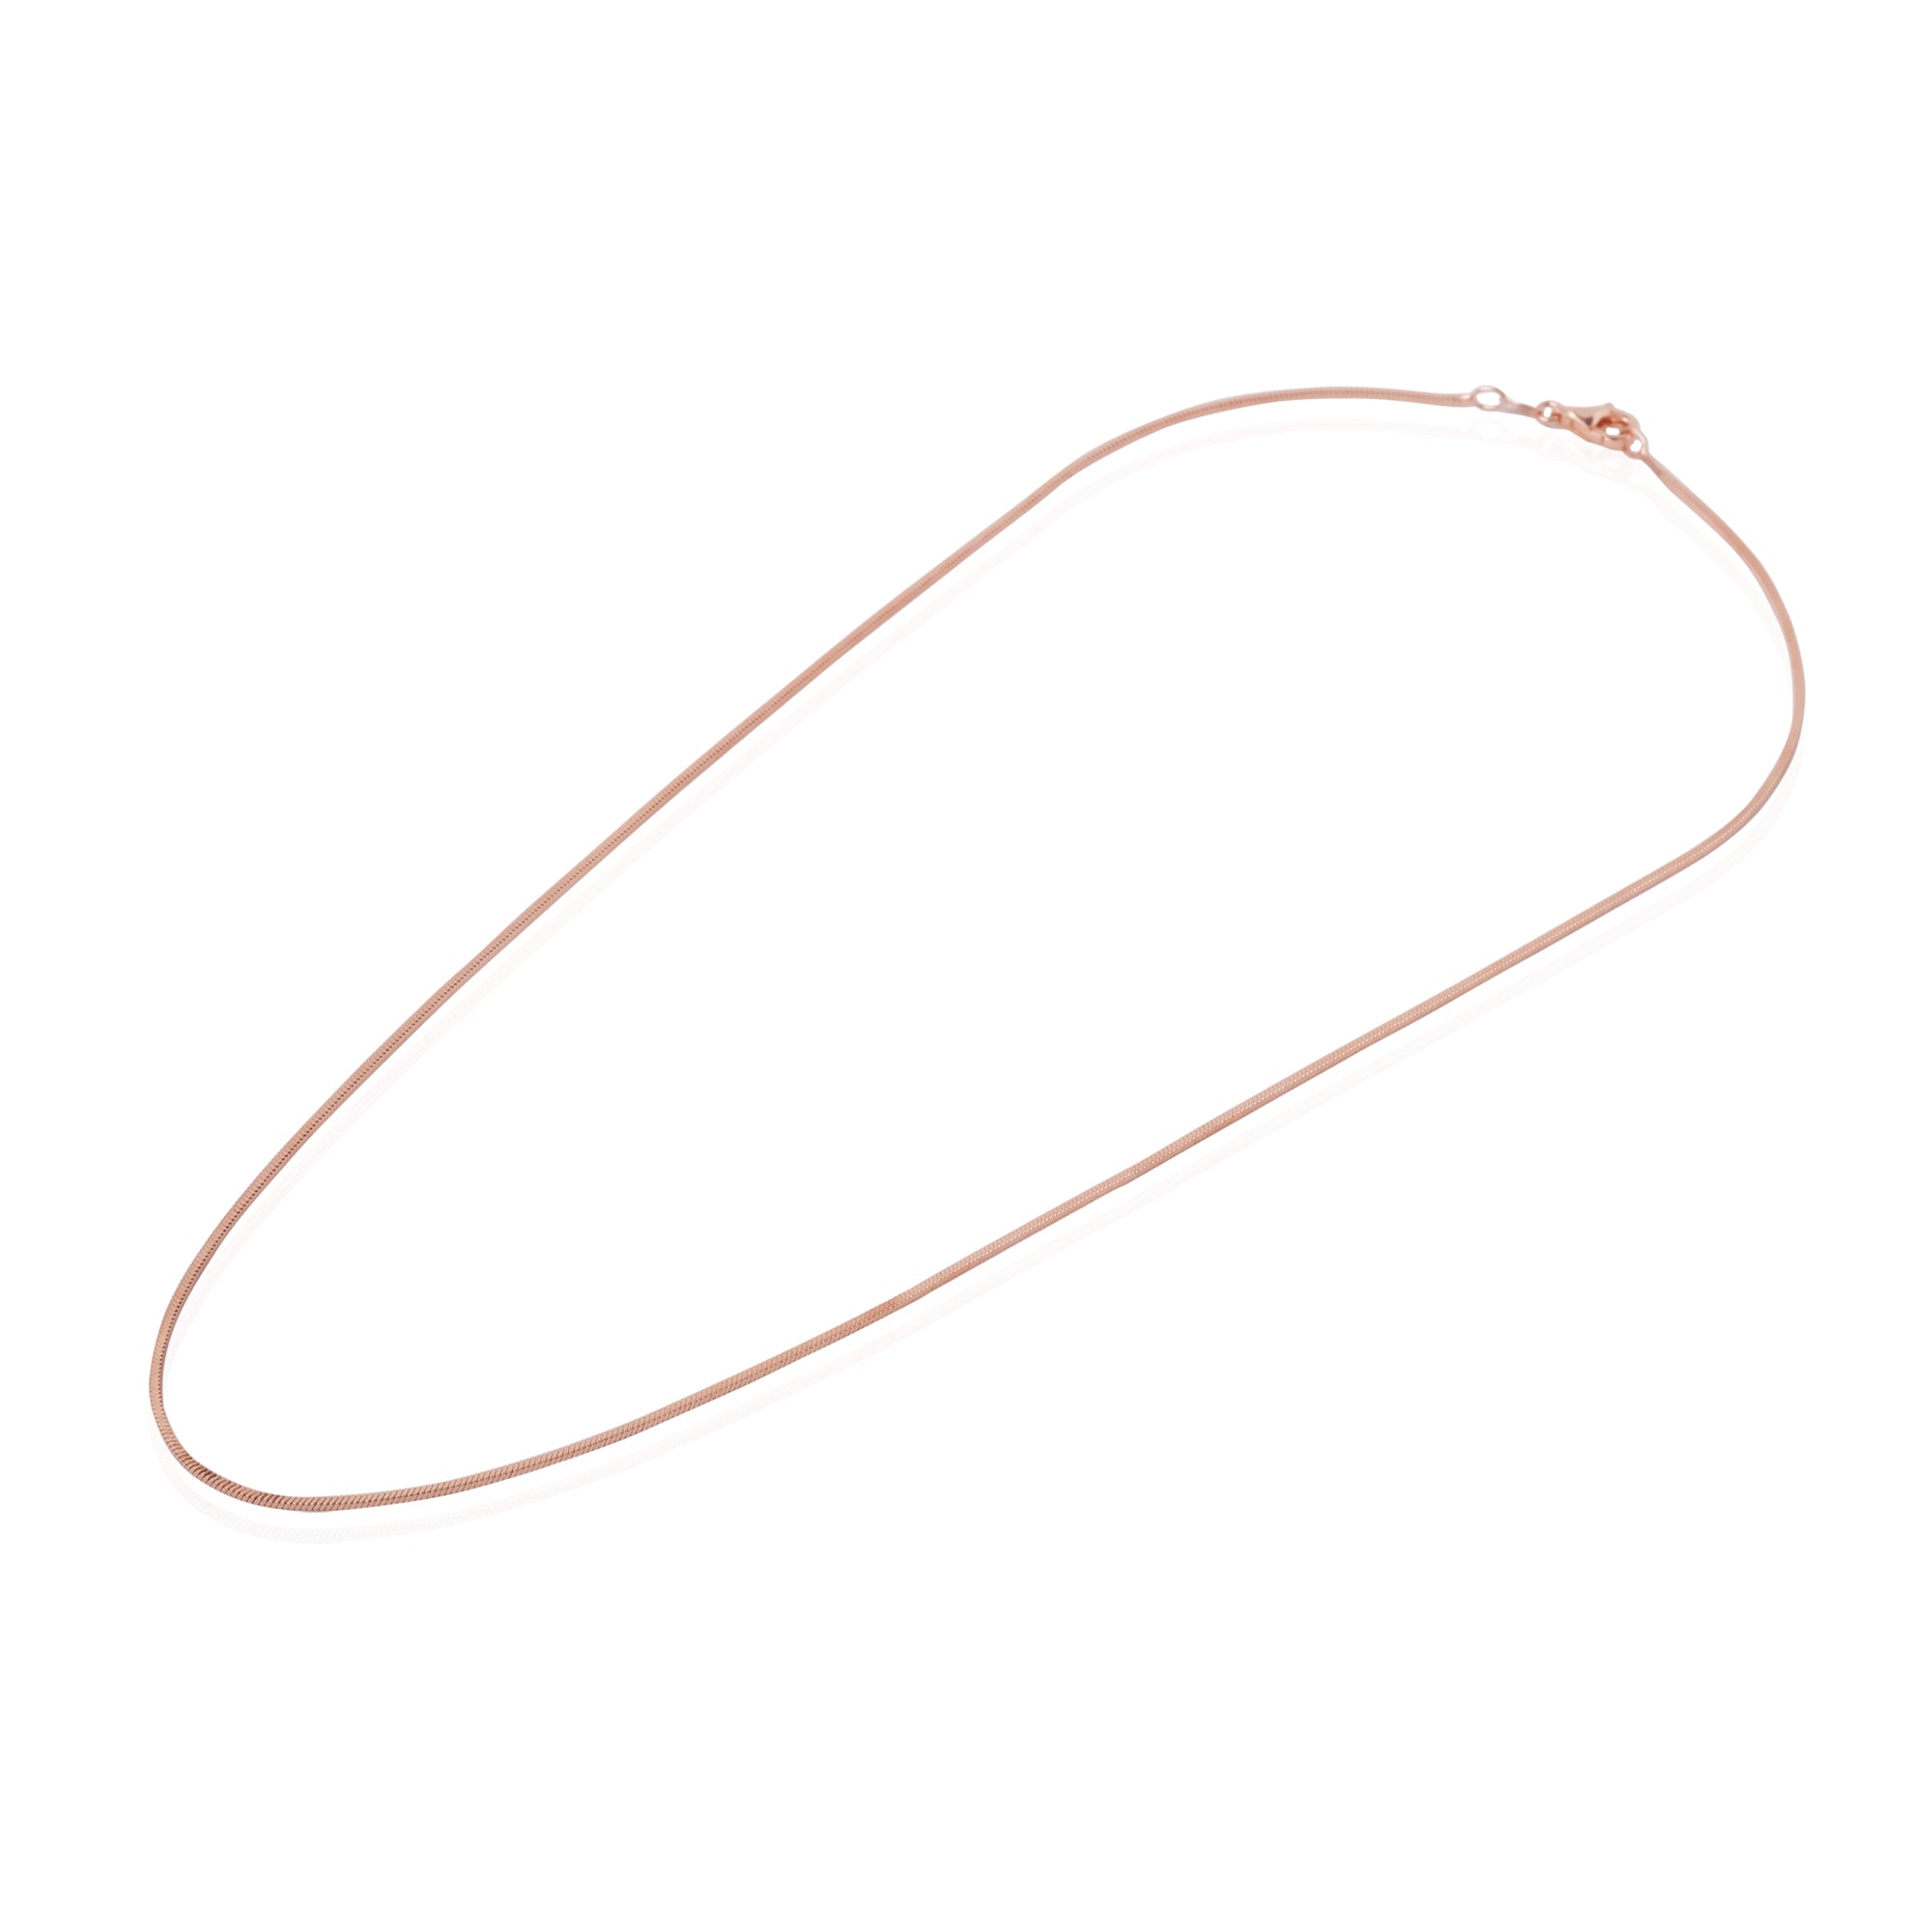 Rosegold Plated Curb Chain Necklace Silver N.409